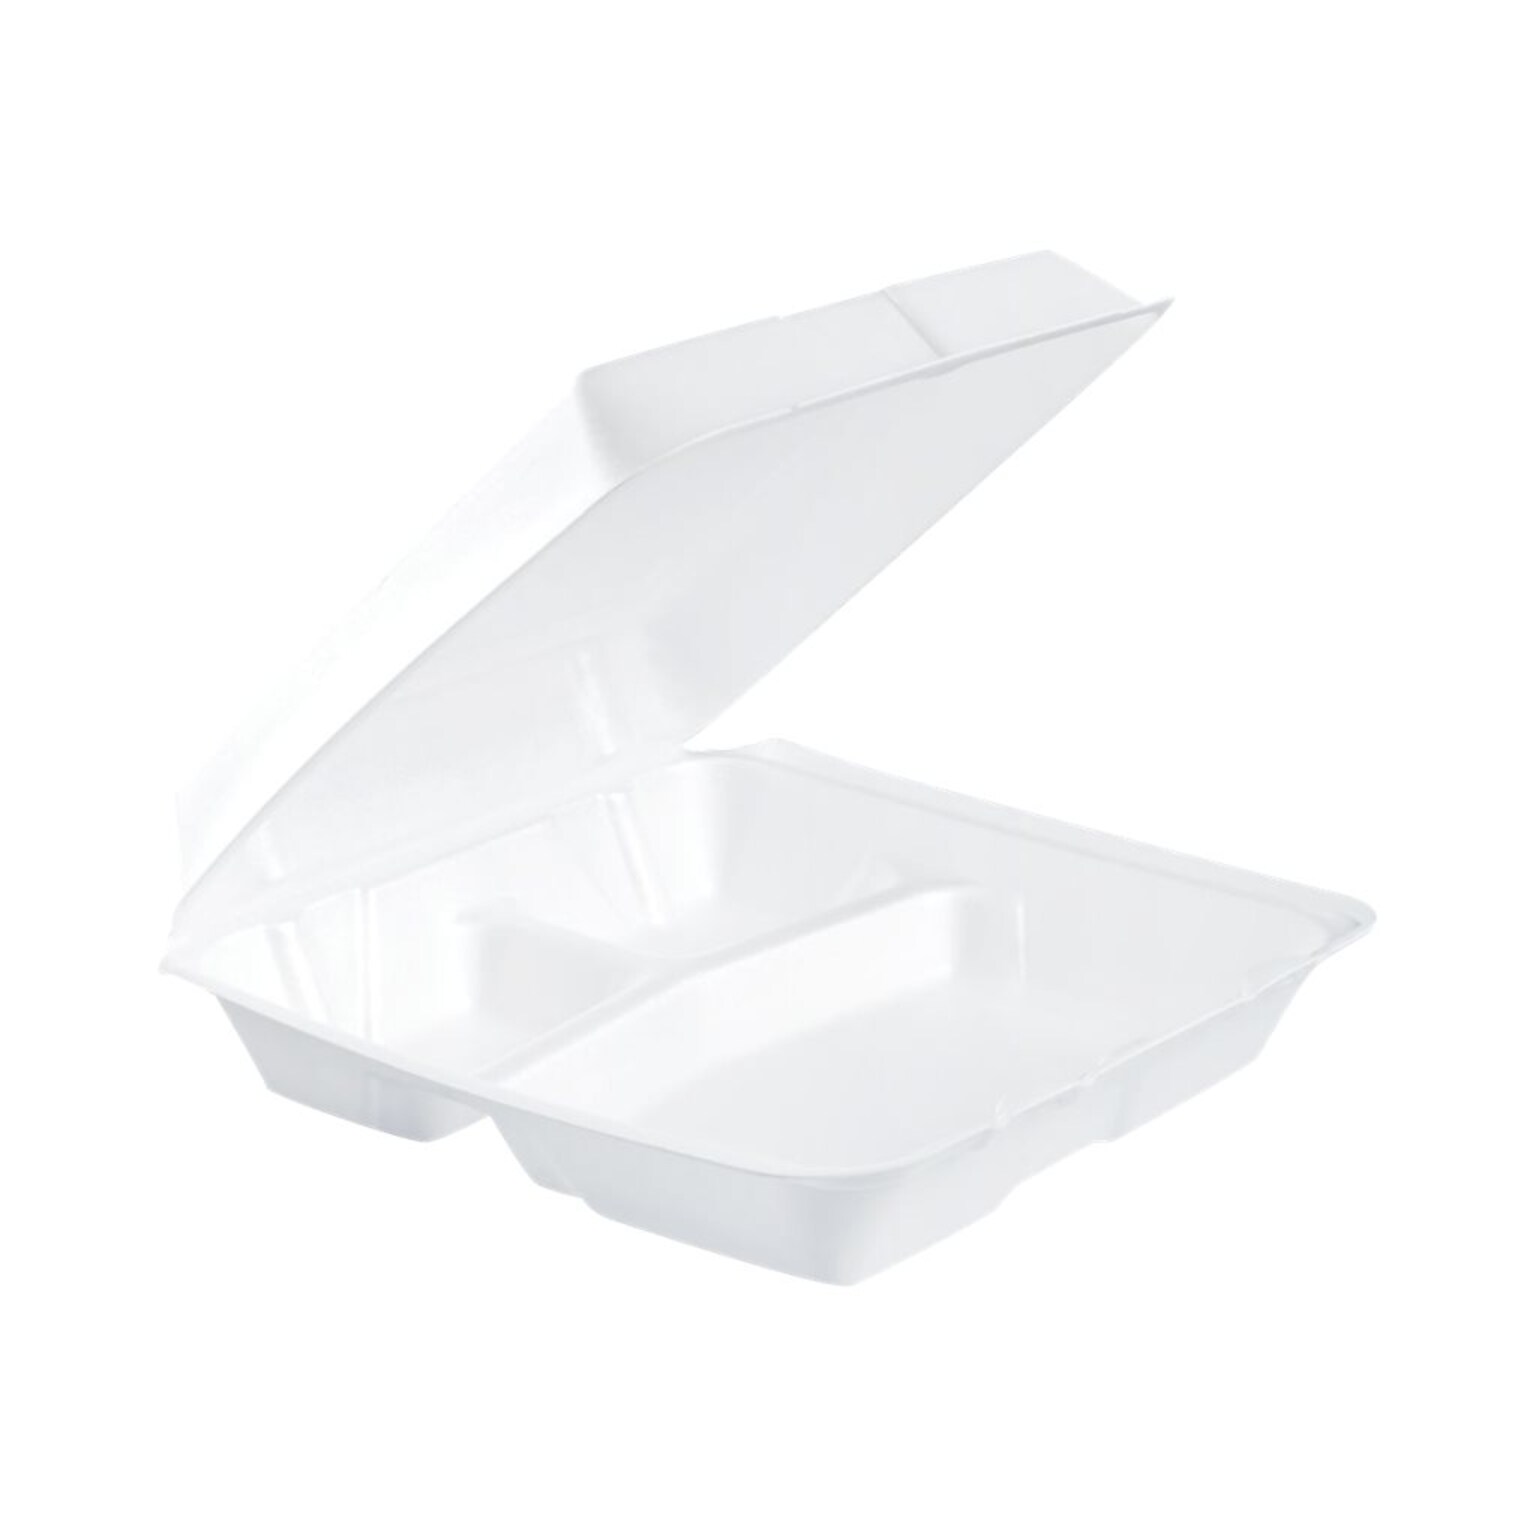 Dart Carry-Out Containers, 200/Carton (95HT3R)